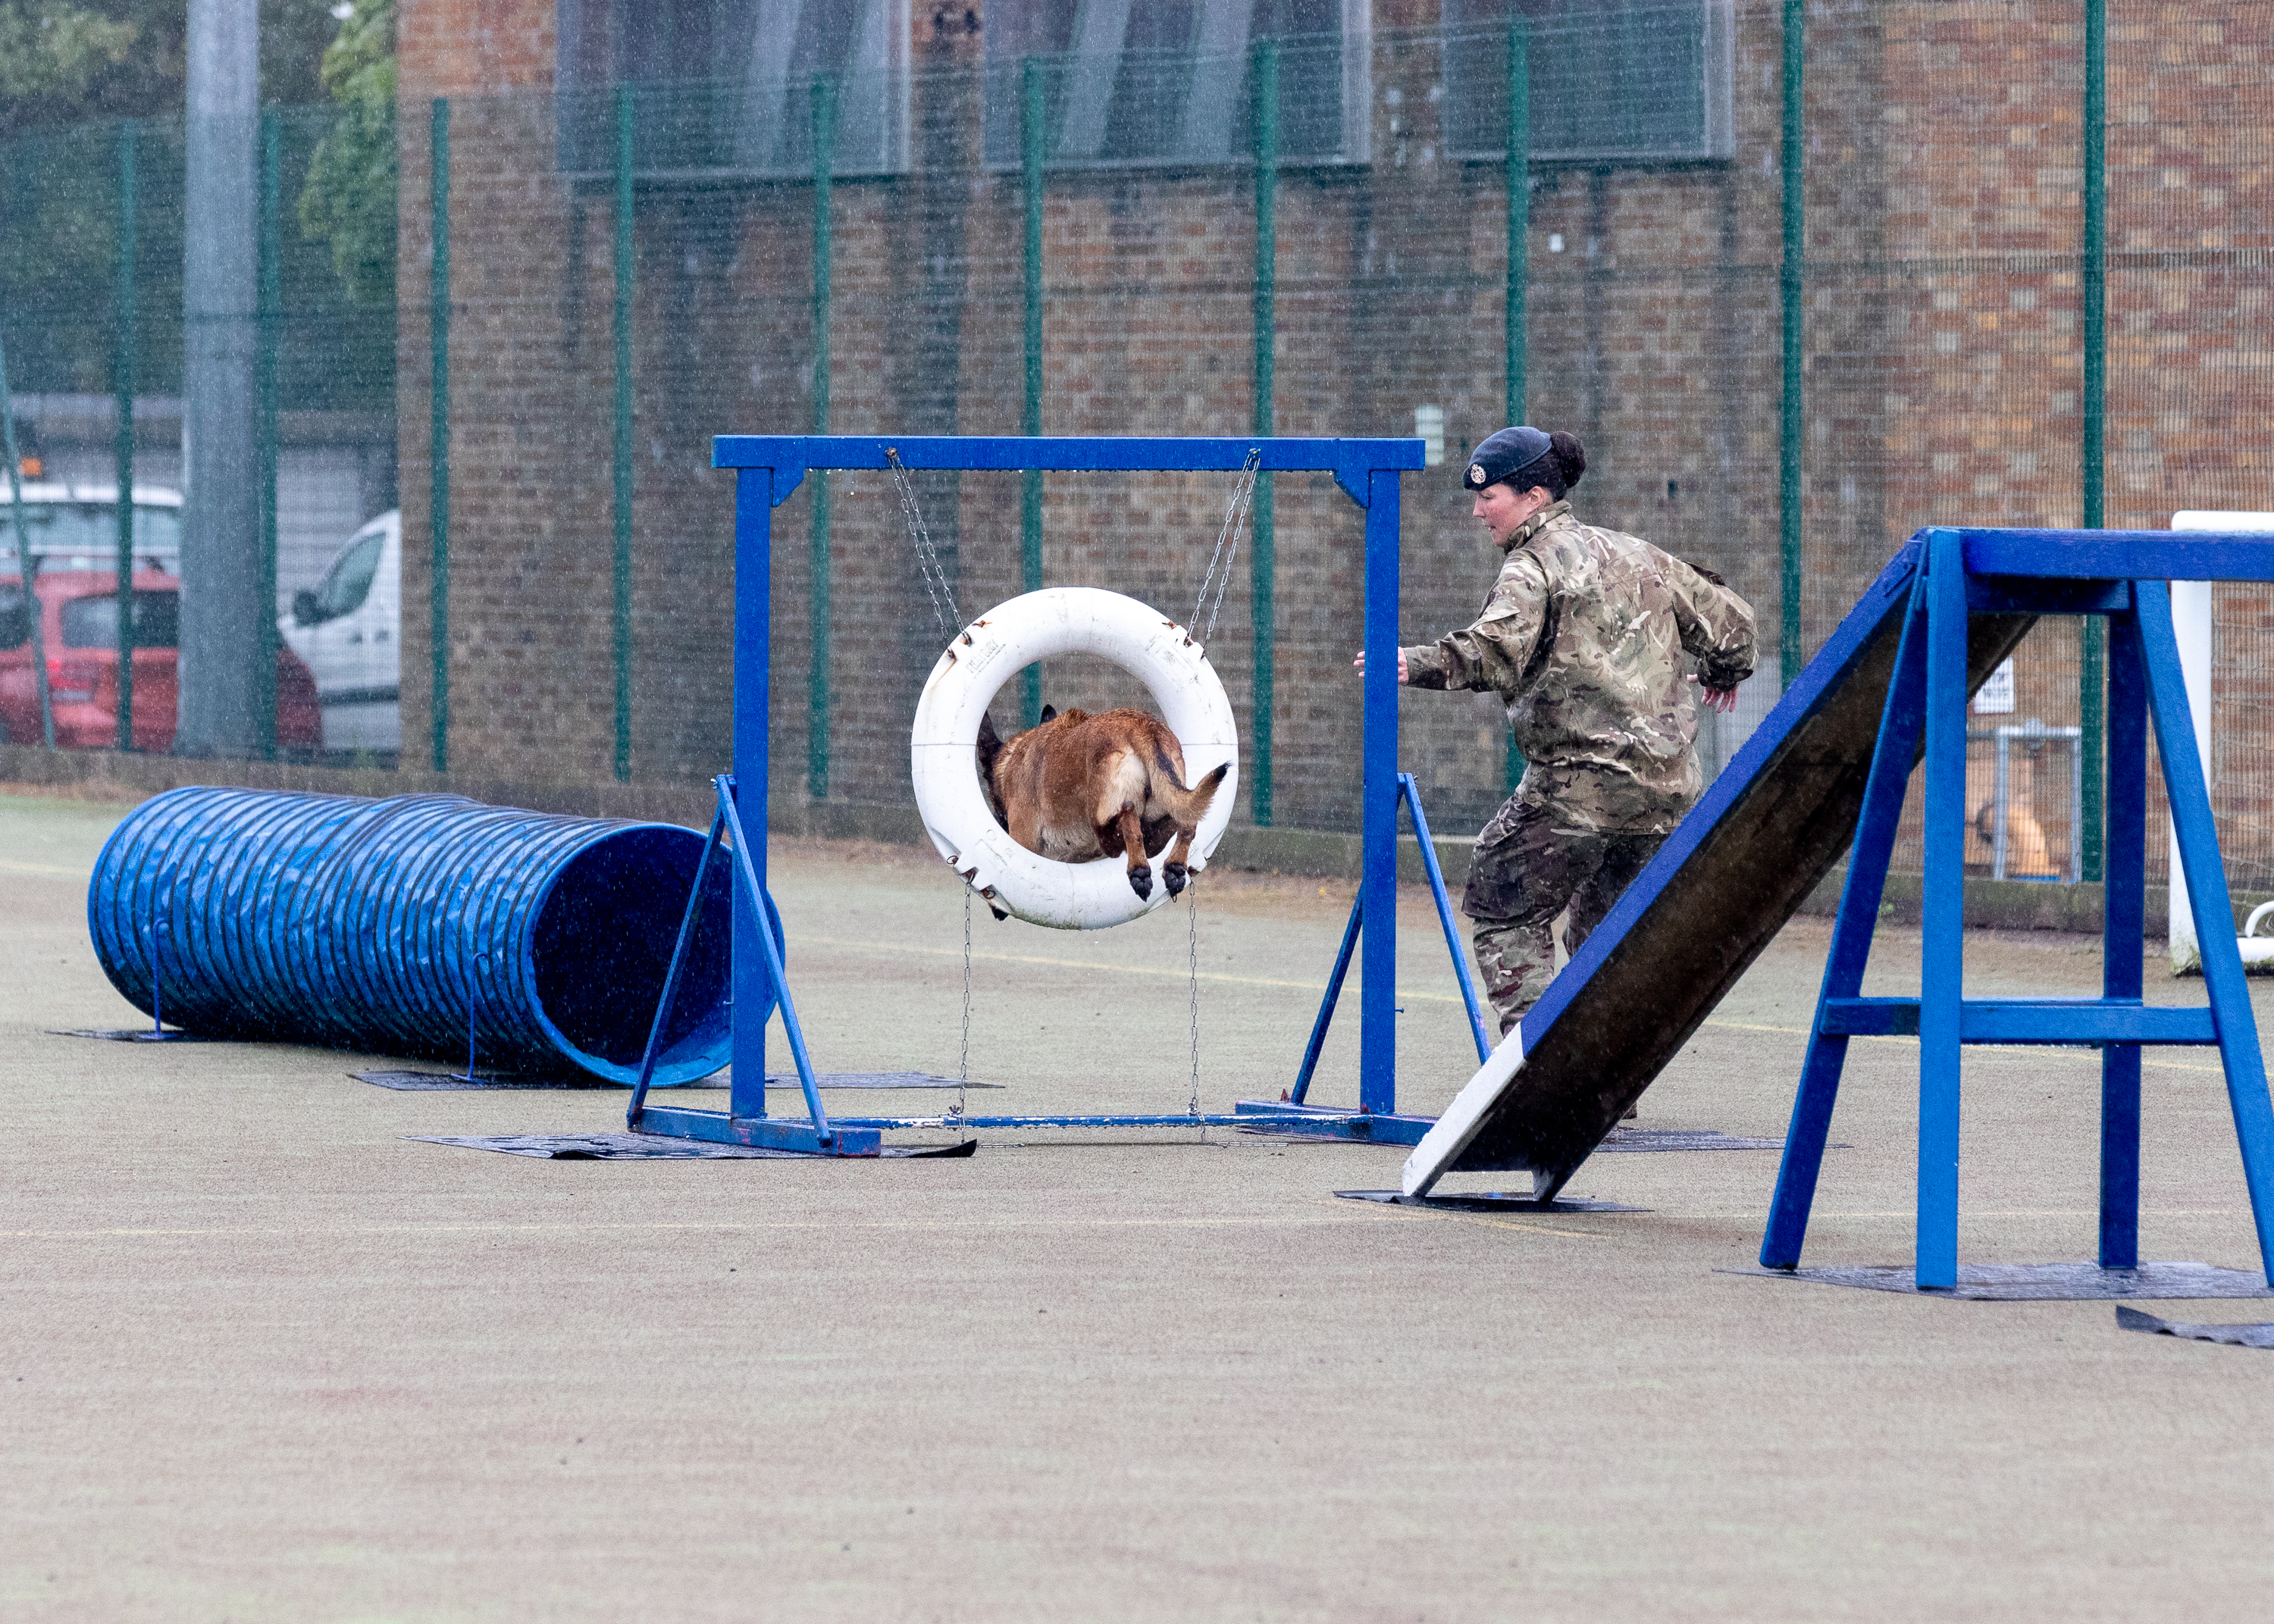 Dog and personnel complete agility course; dog jumps through hoop.